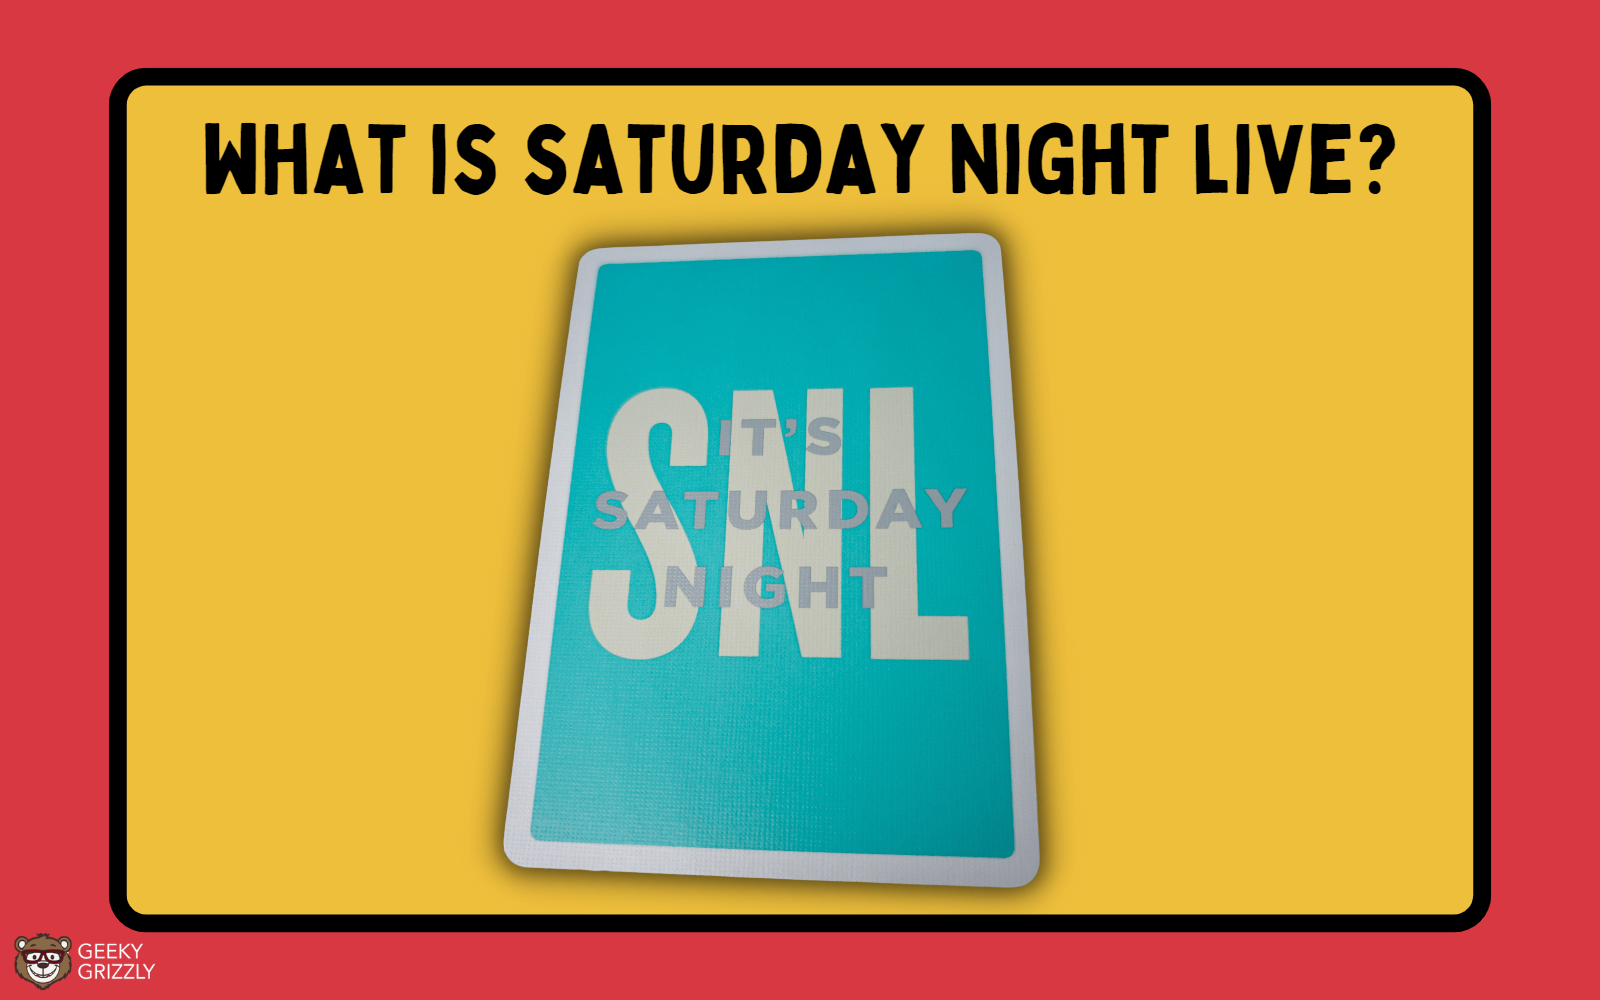 What is SNL